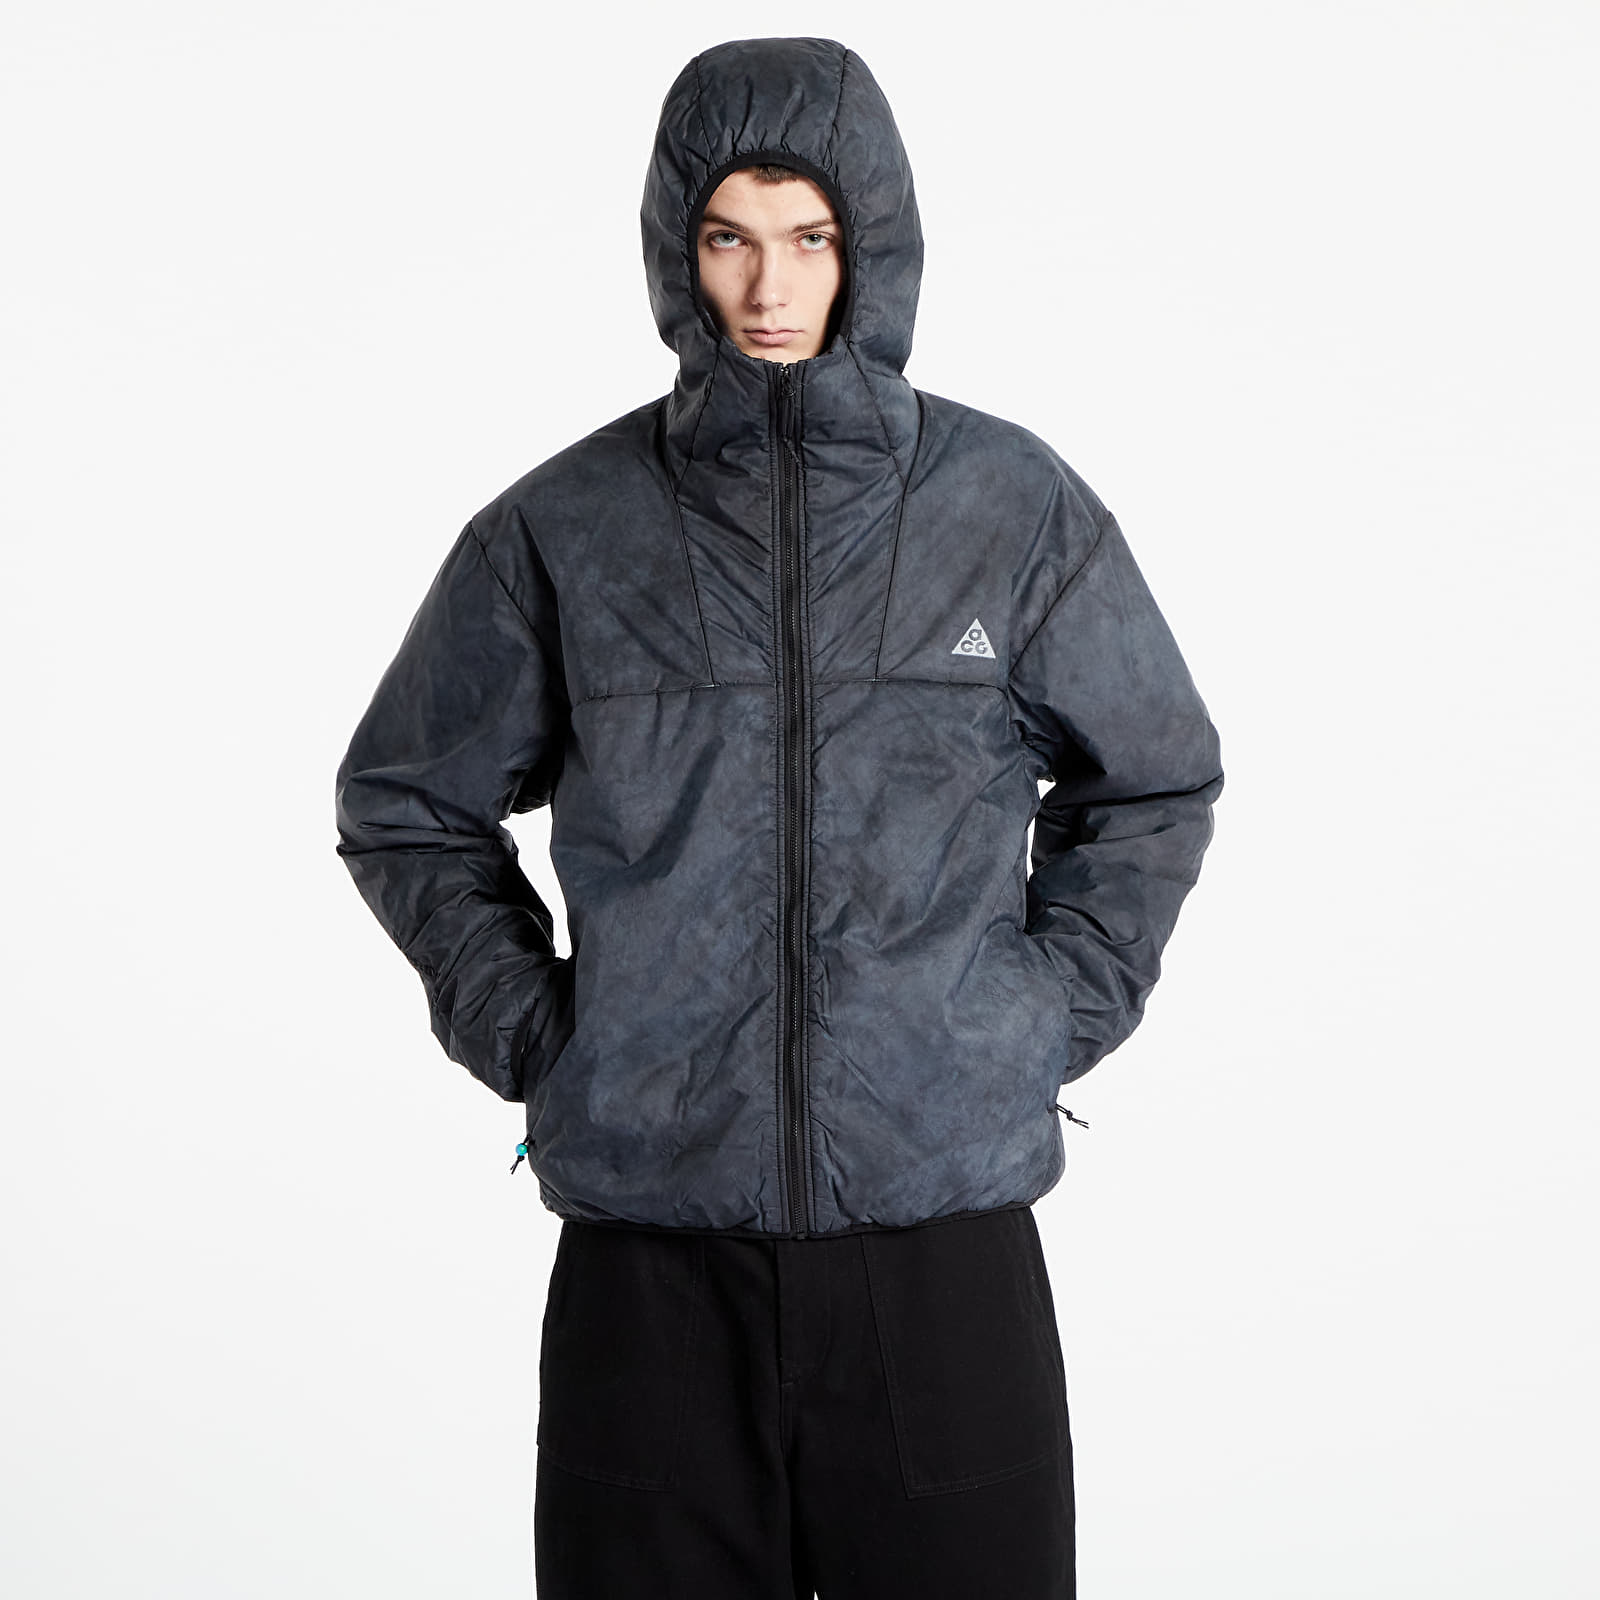 Bundy Nike ACG Therma-FIT ADV "Rope De Dope" Packable Insulated Jacket Black